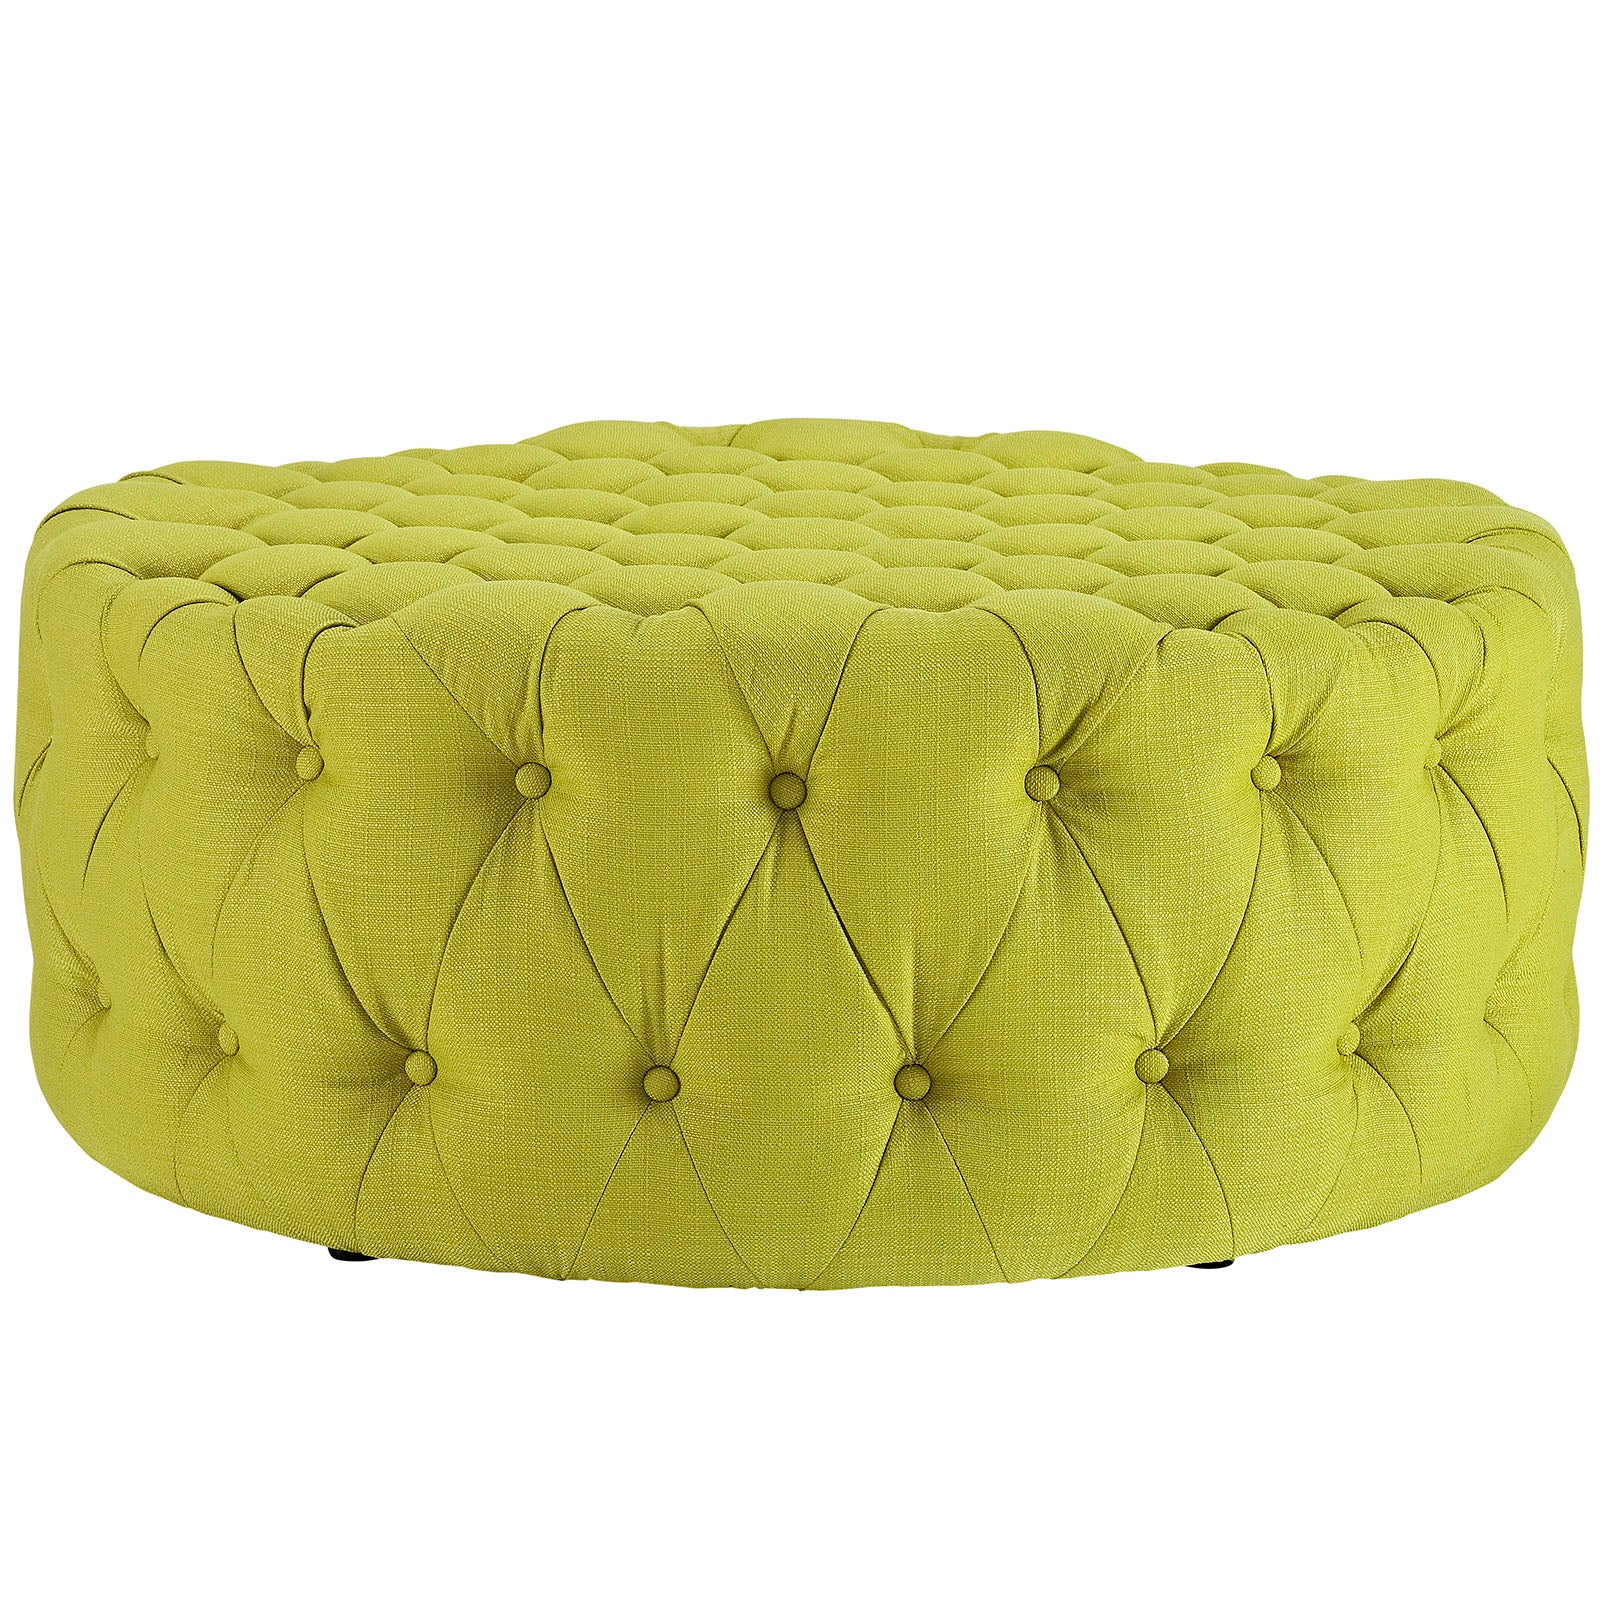 Amour Upholstered Fabric Ottoman - East Shore Modern Home Furnishings